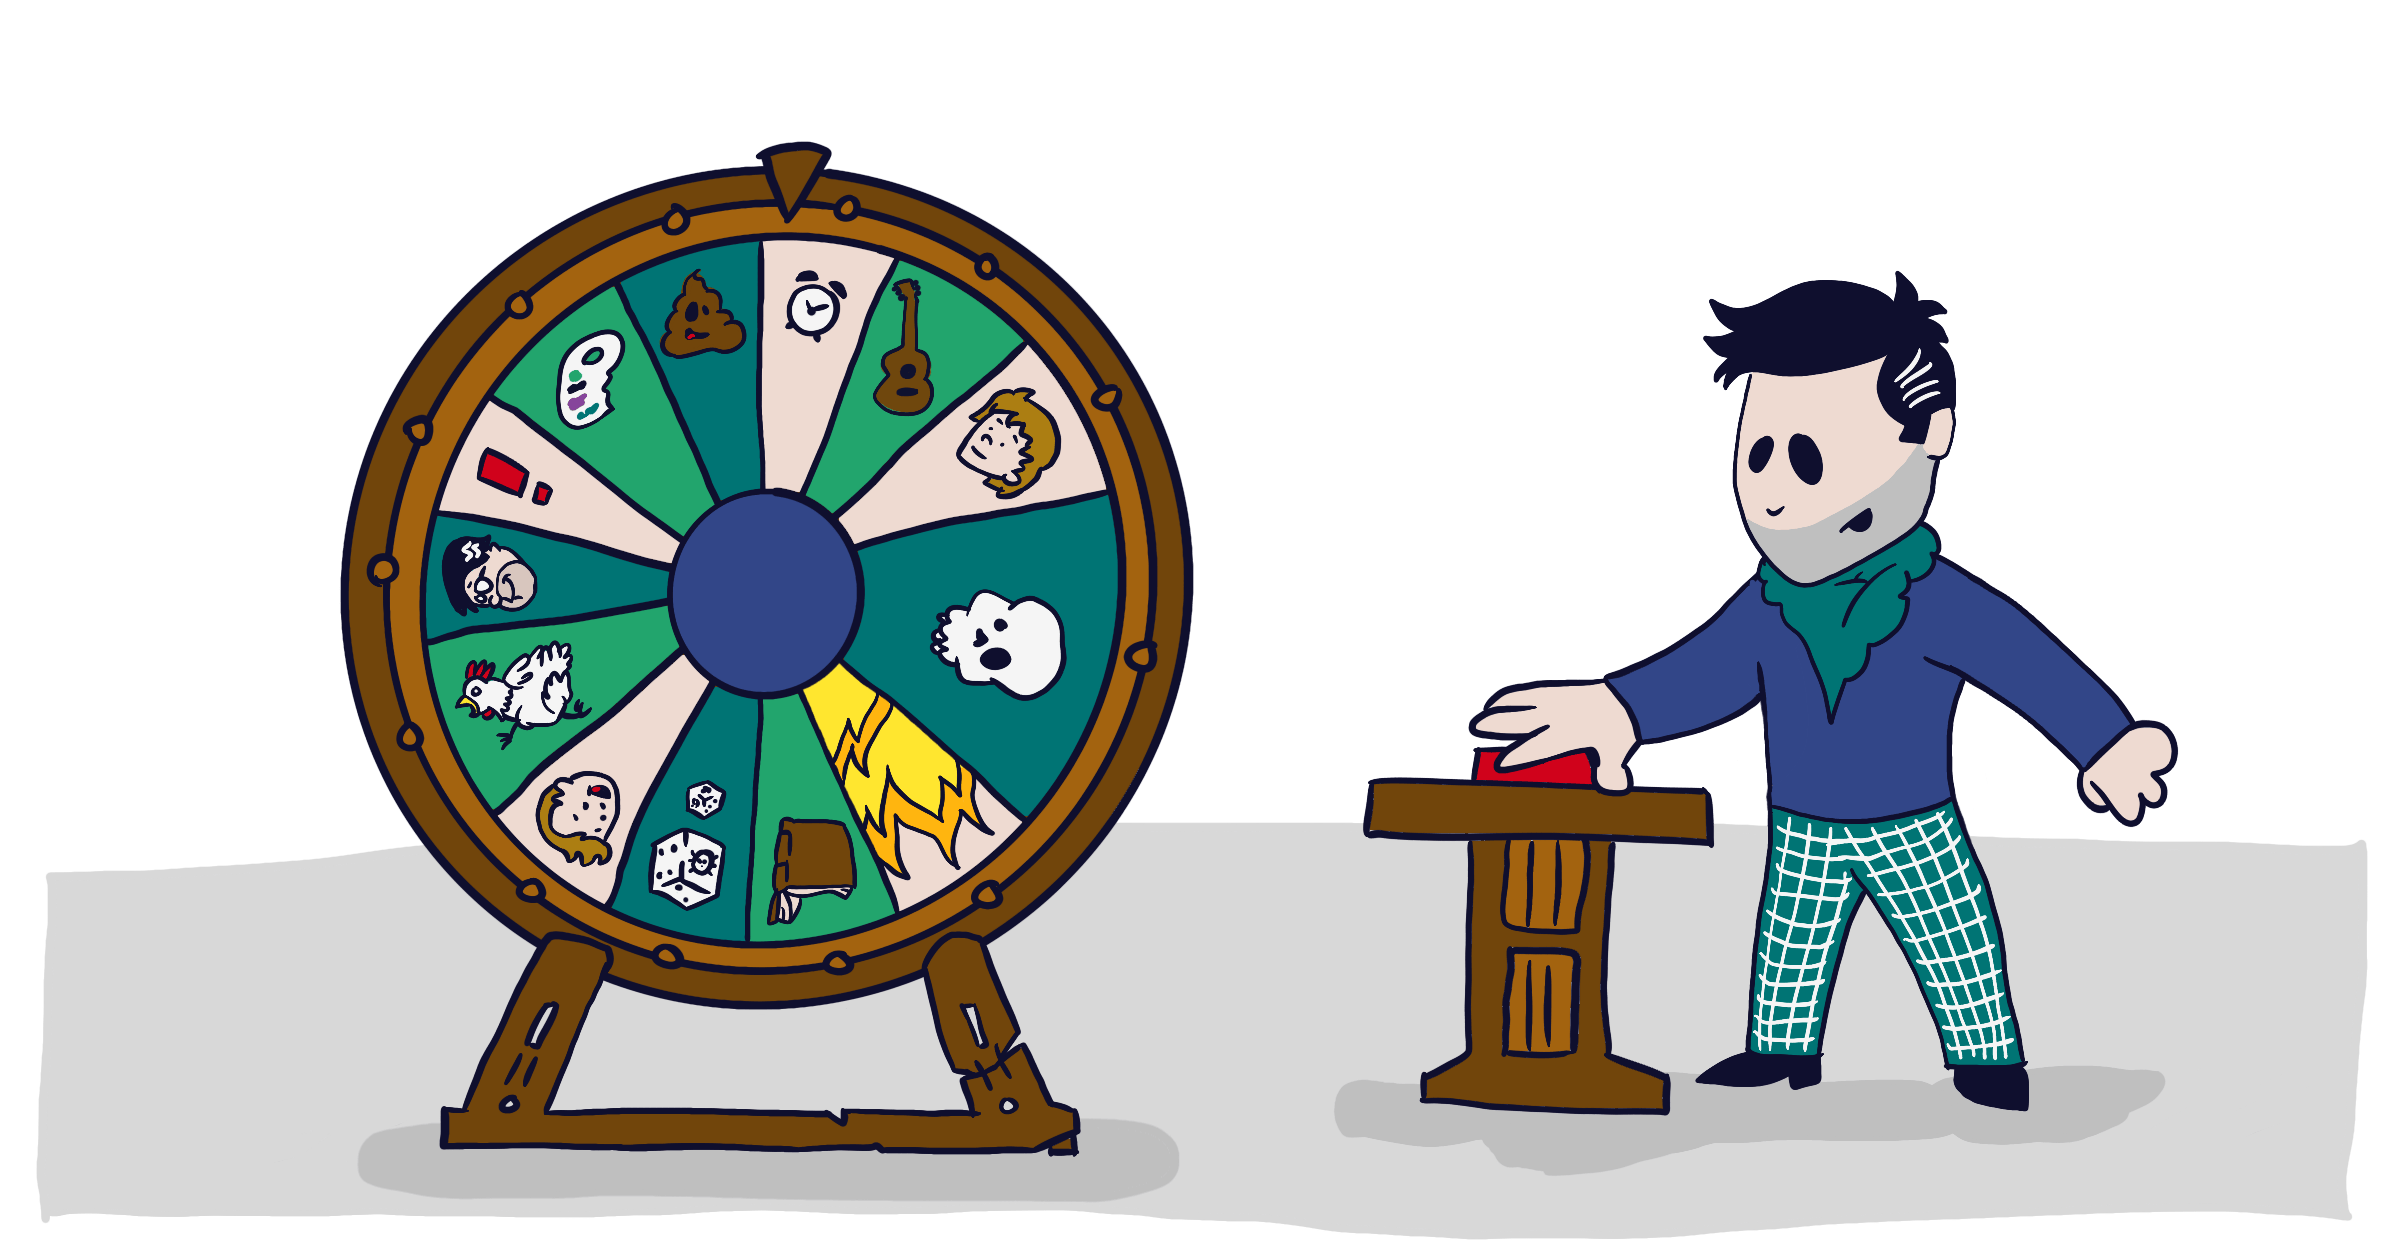 Carlos Eriksson as a Disney character standing my fortune wheel depicting all the different things he's historically done and blogged about, like shitting himself.